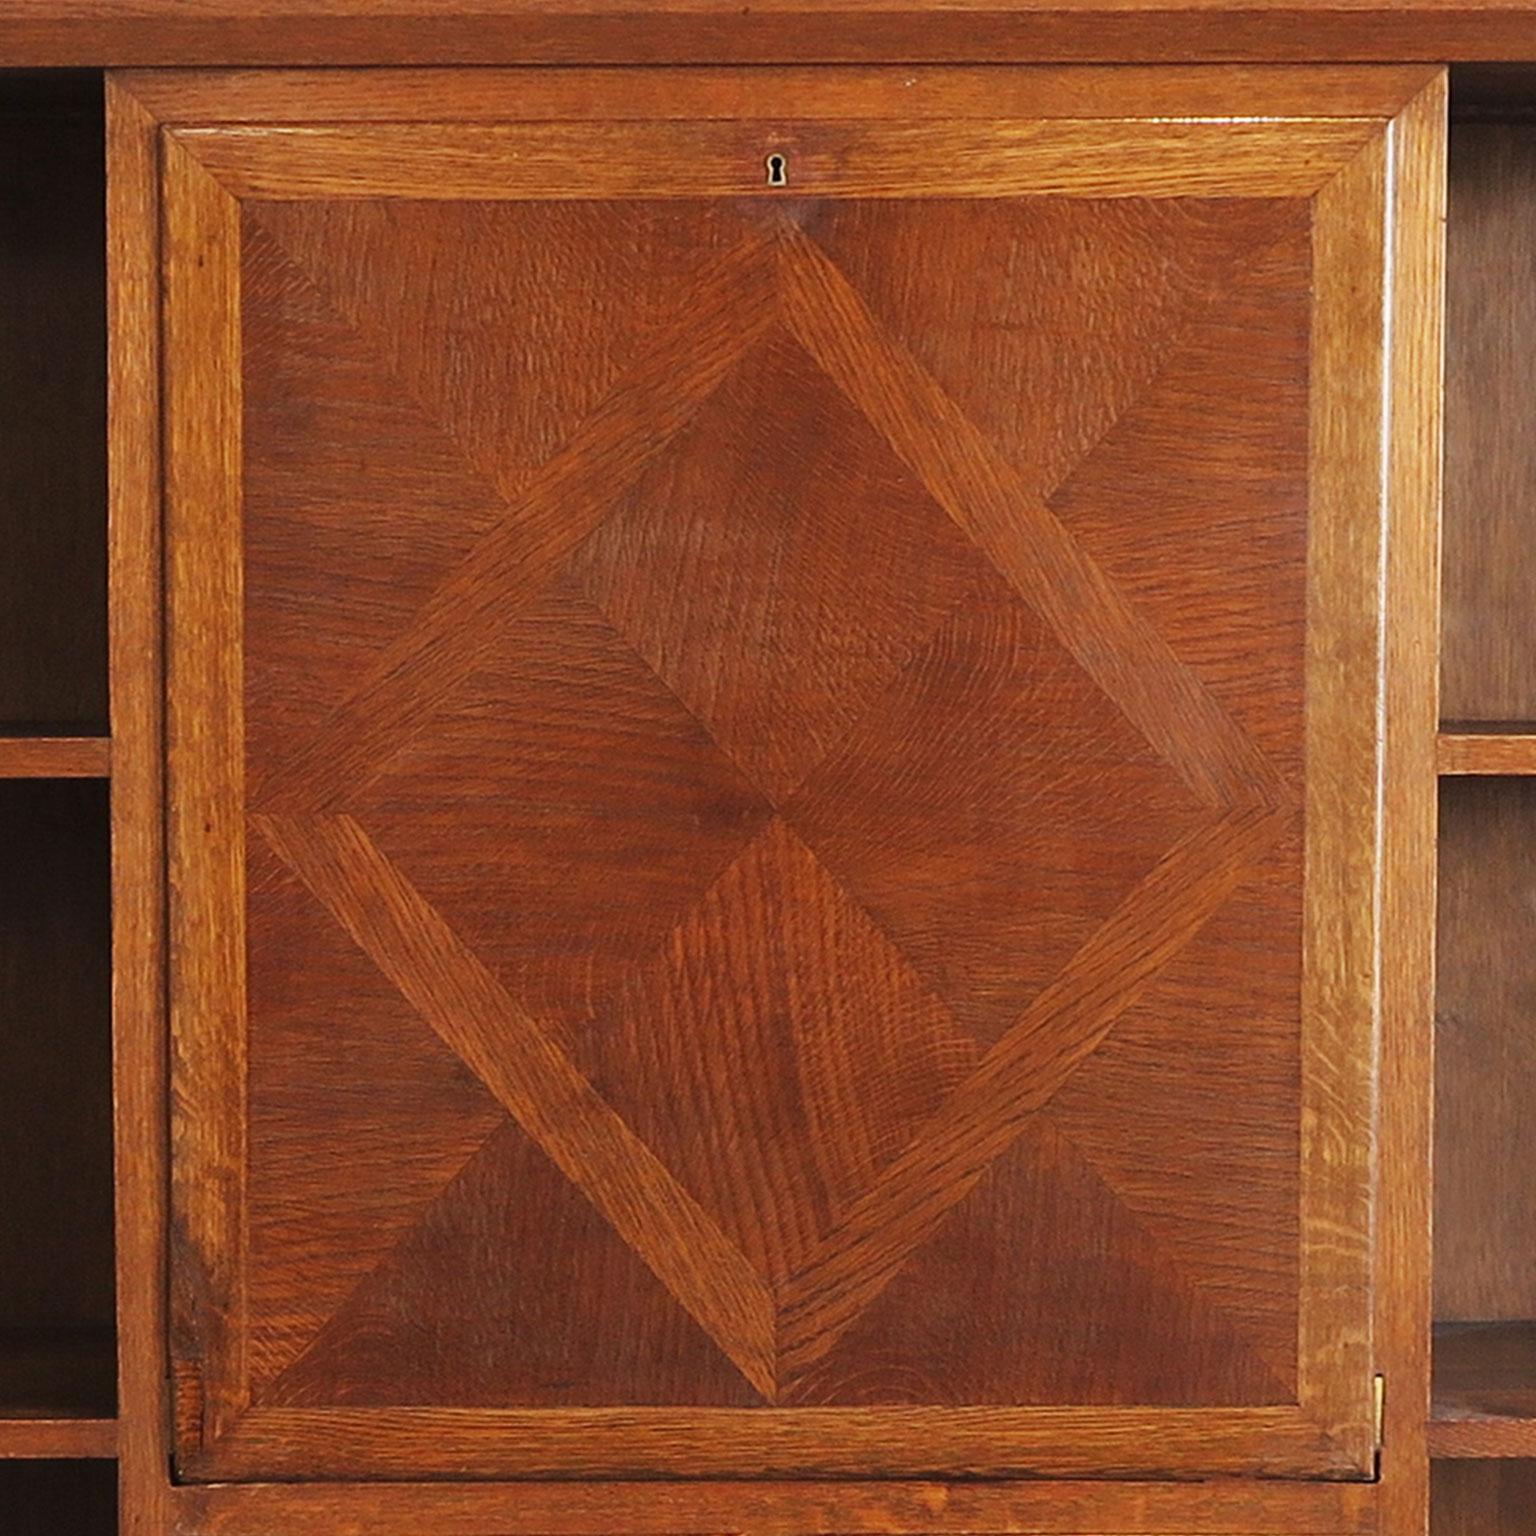 20th Century Midcentury Cabinet Arttributed to E. Lanzia, Italy, circa 1940s For Sale